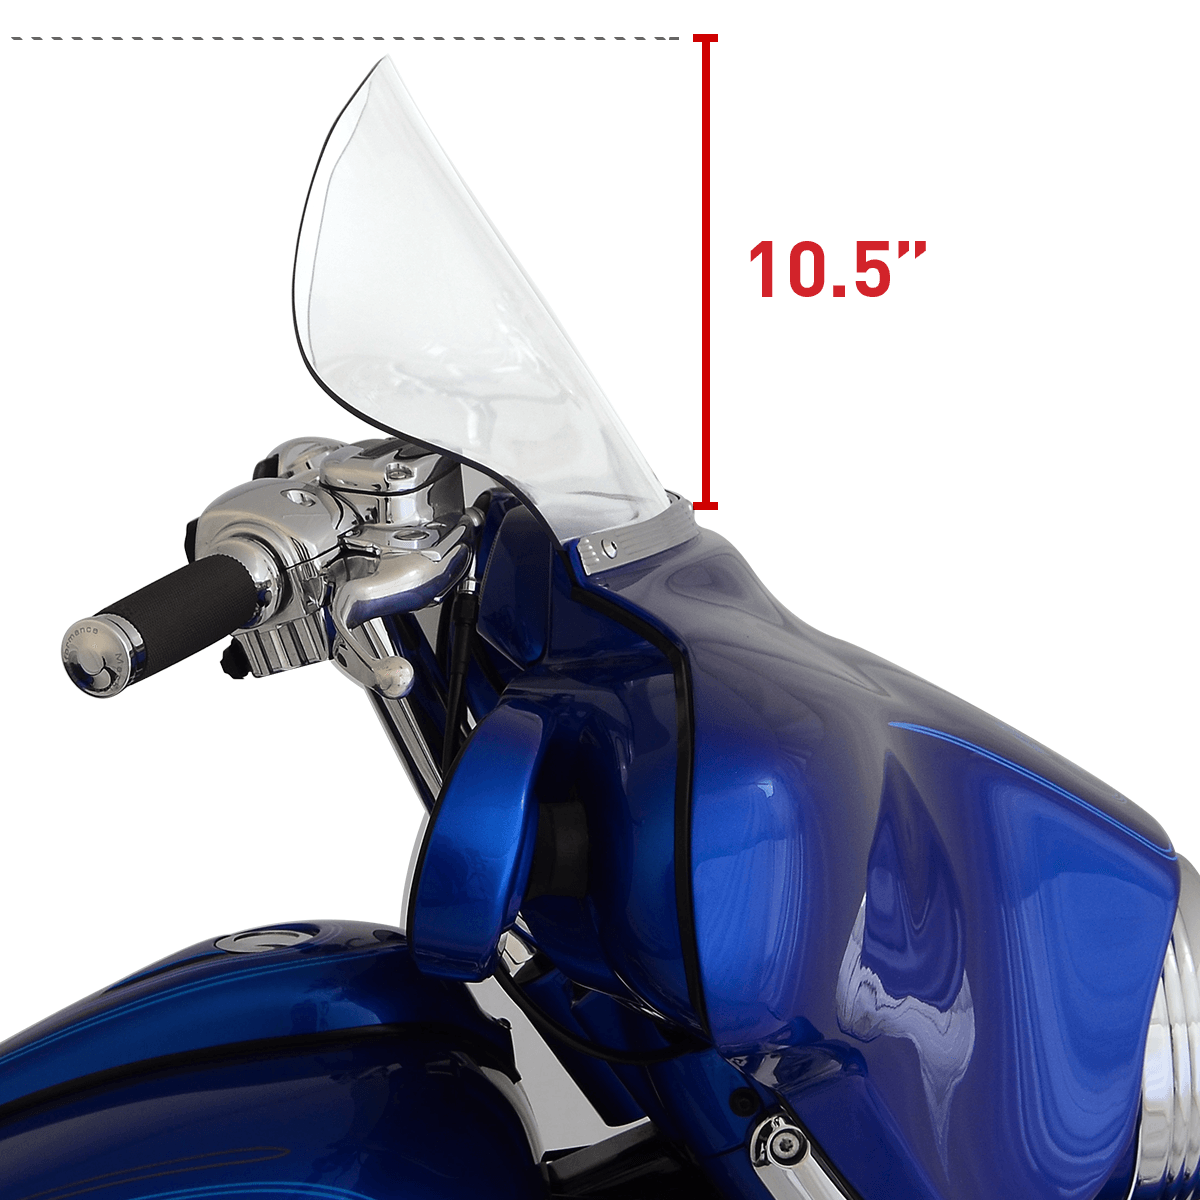 11.5" Clear Flare™ Windshield for Harley-Davidson 1996-2013 FLH(11.5" Clear)